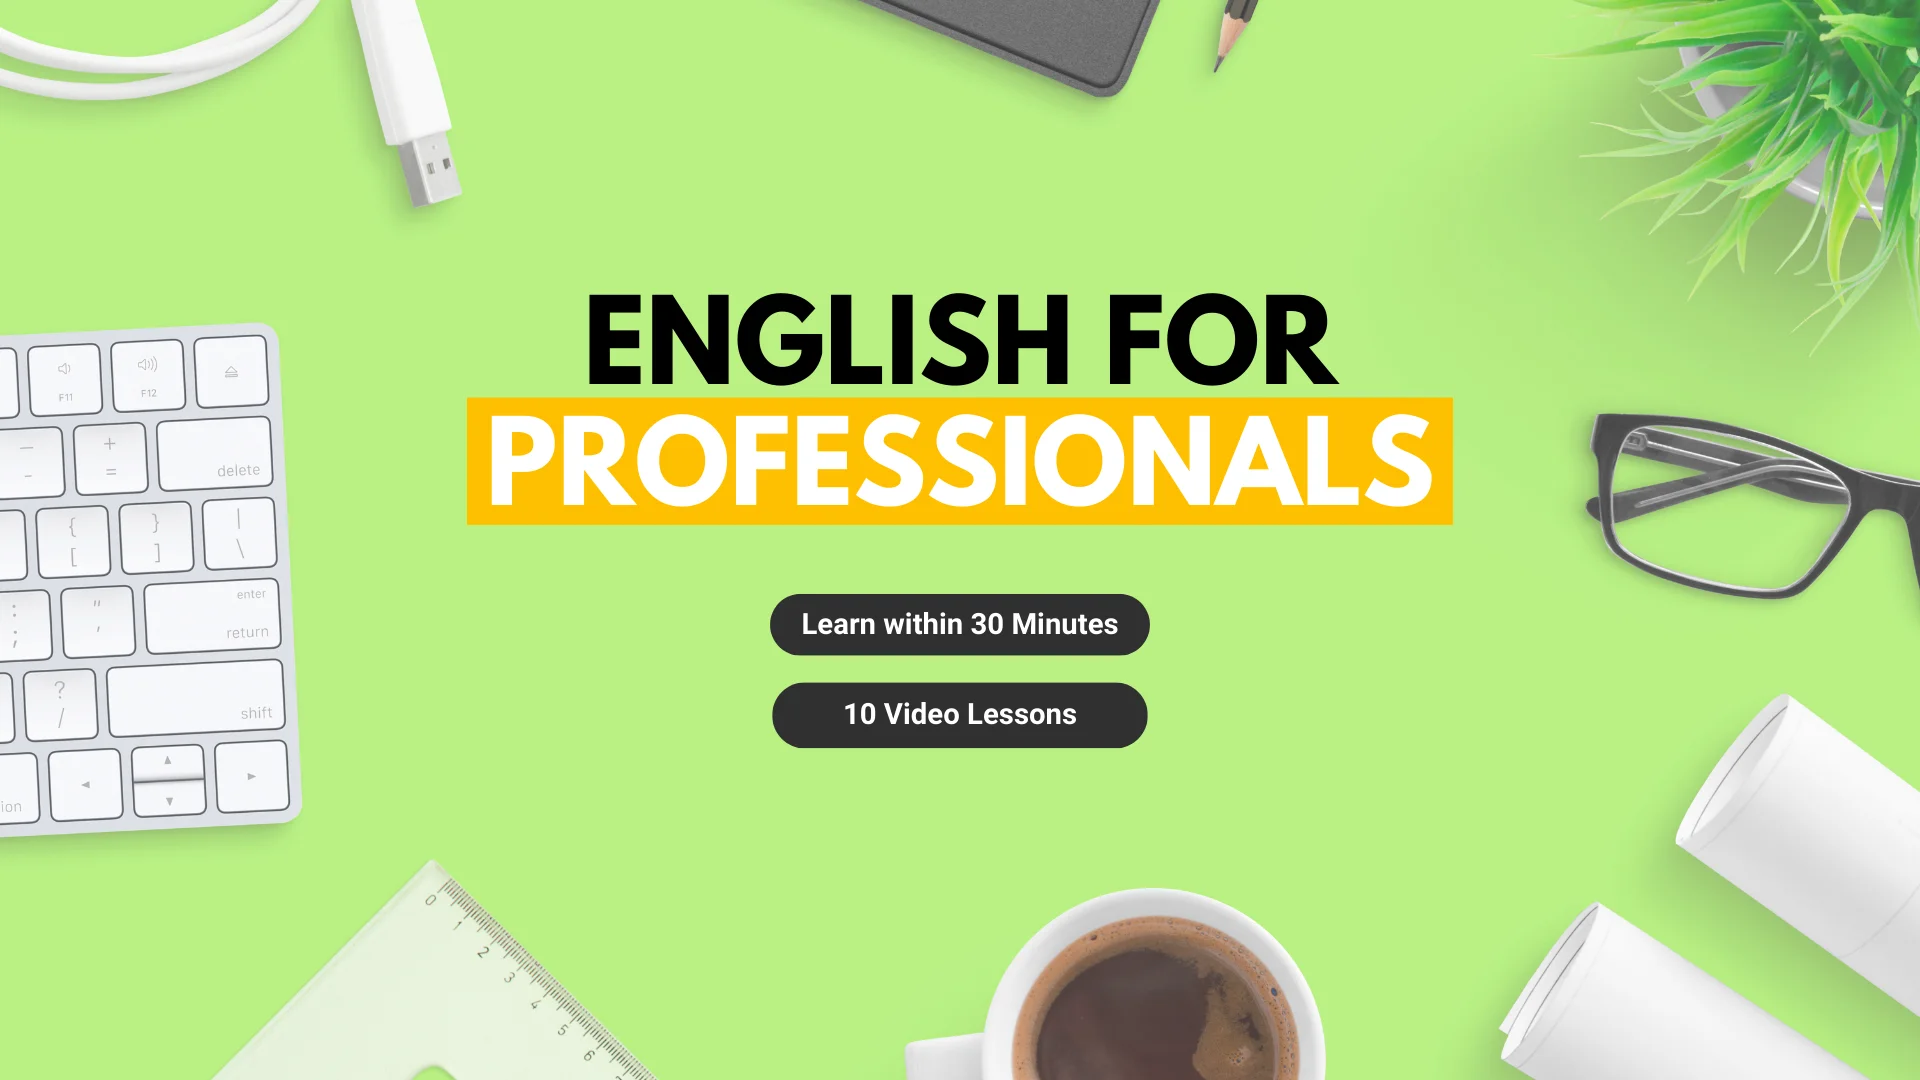 English For Professionals Course Image